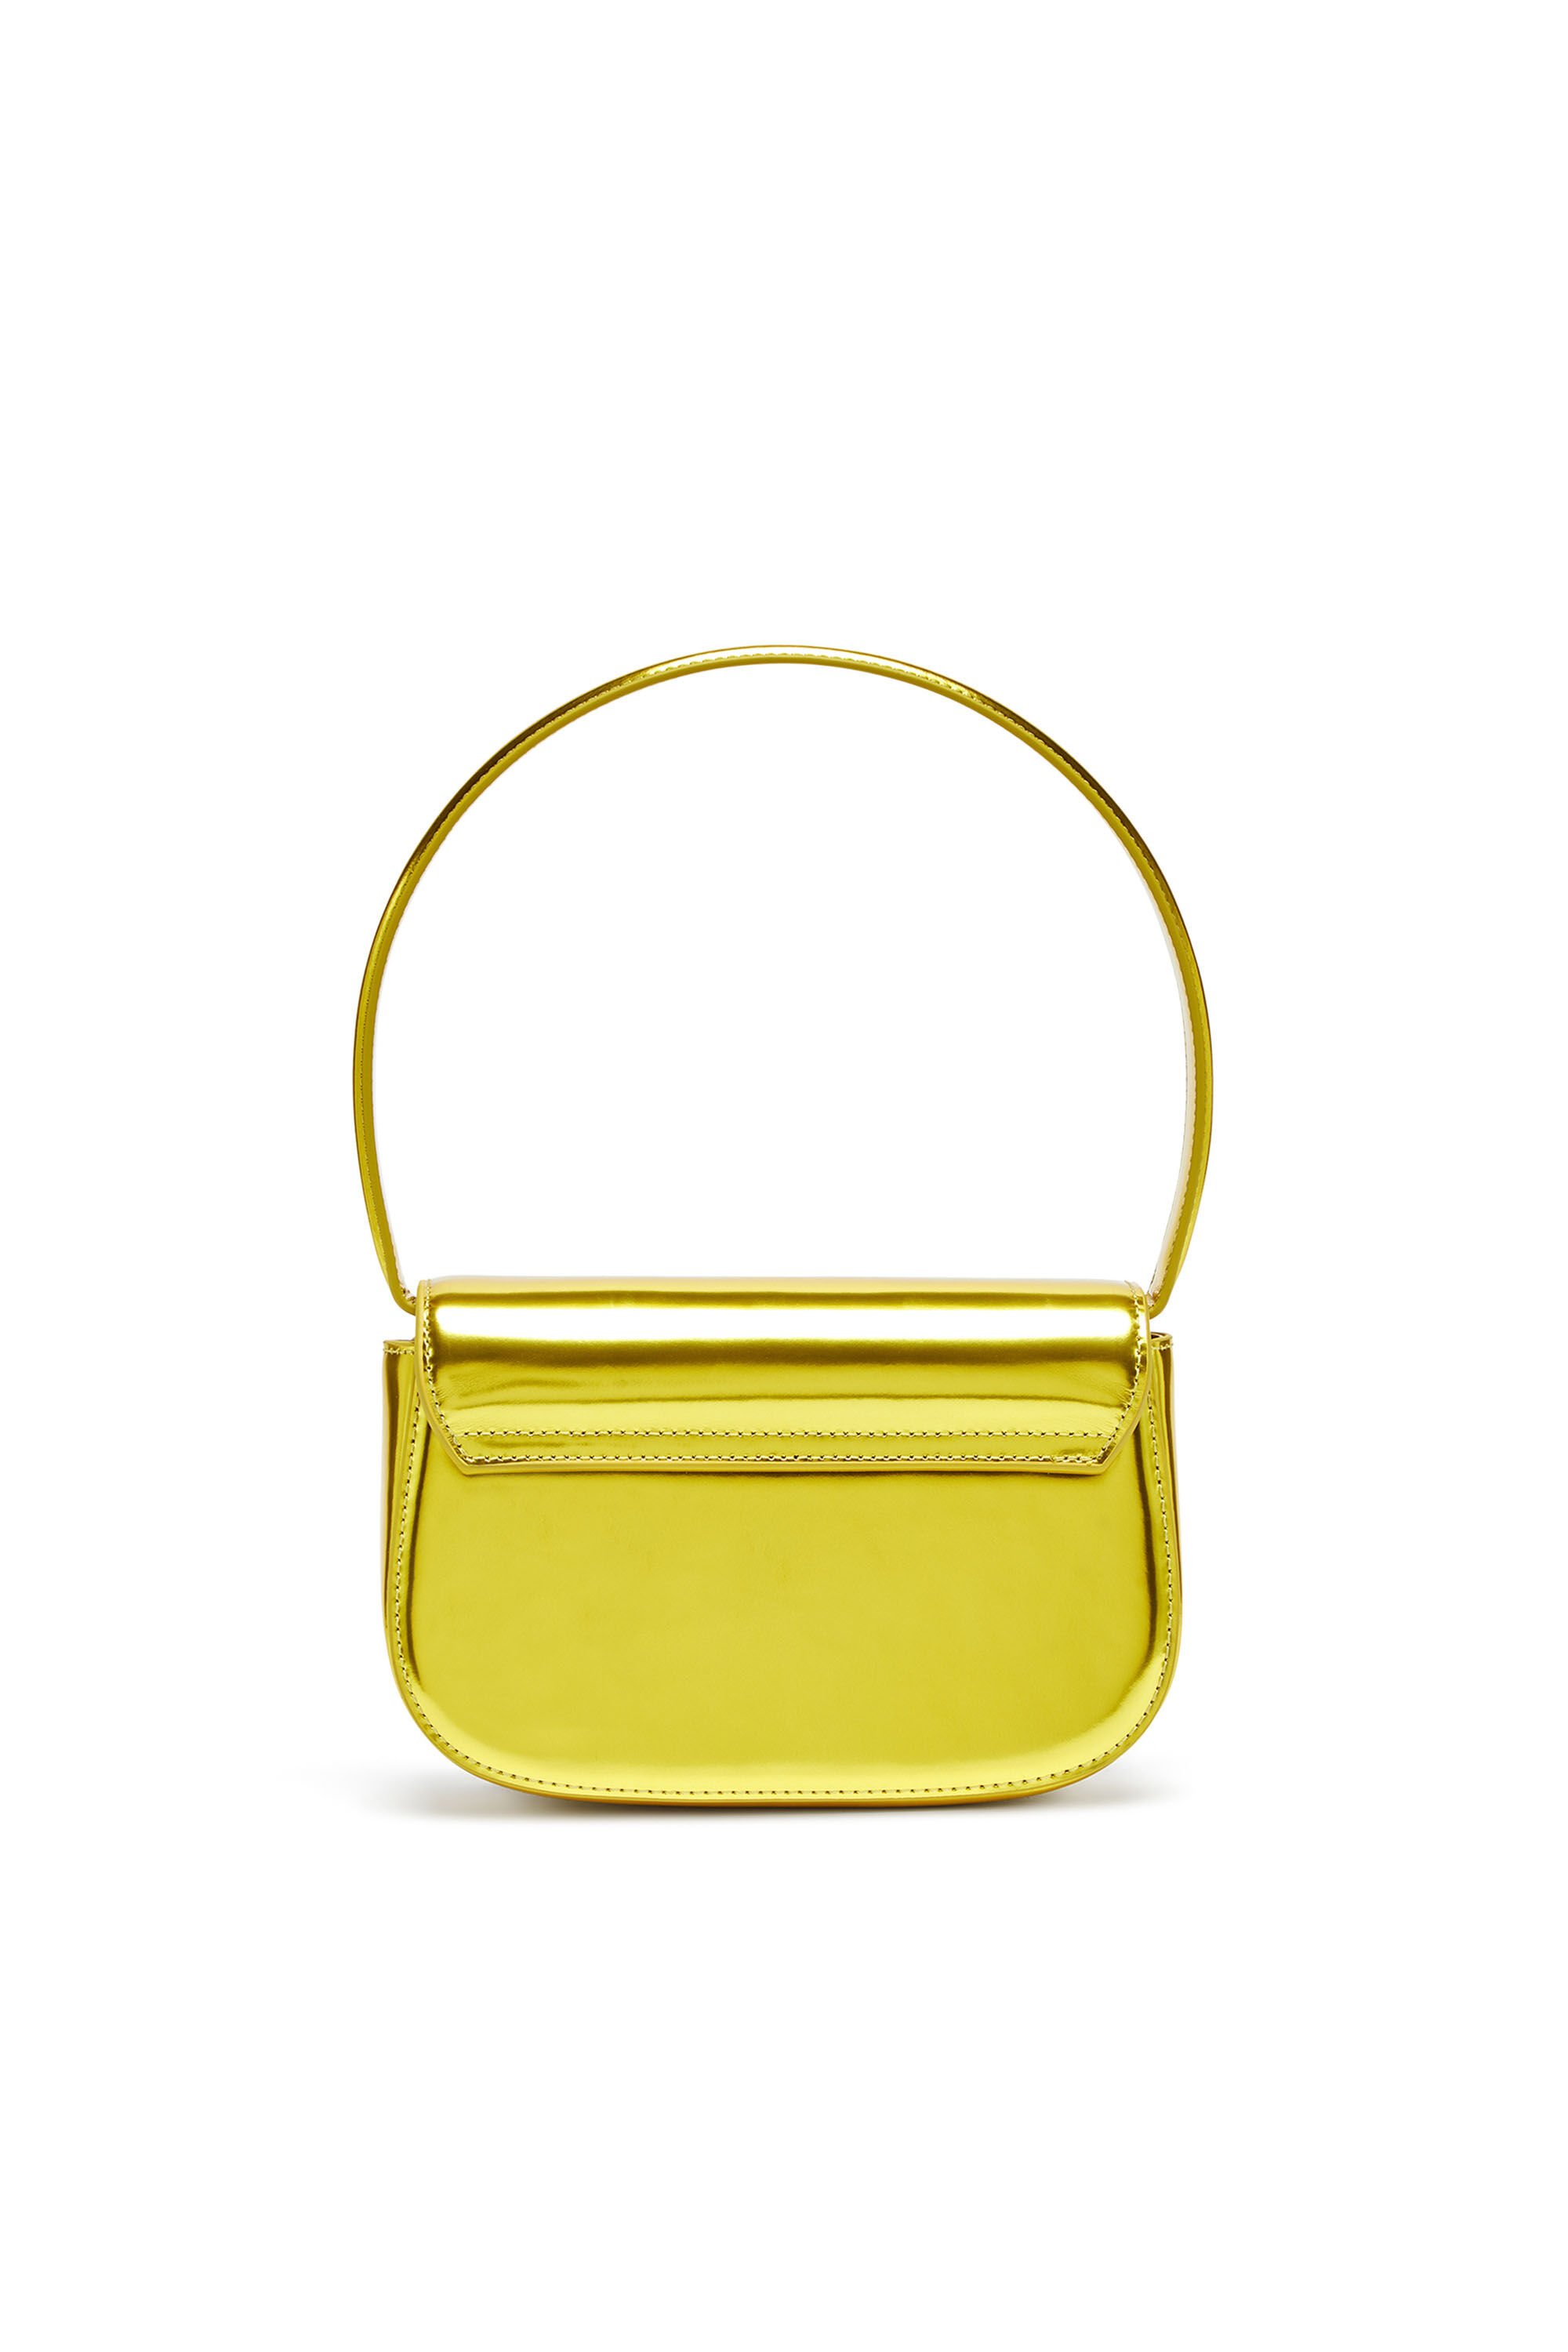 Diesel - 1DR, Woman 1DR-Iconic shoulder bag in mirrored leather in Yellow - Image 3